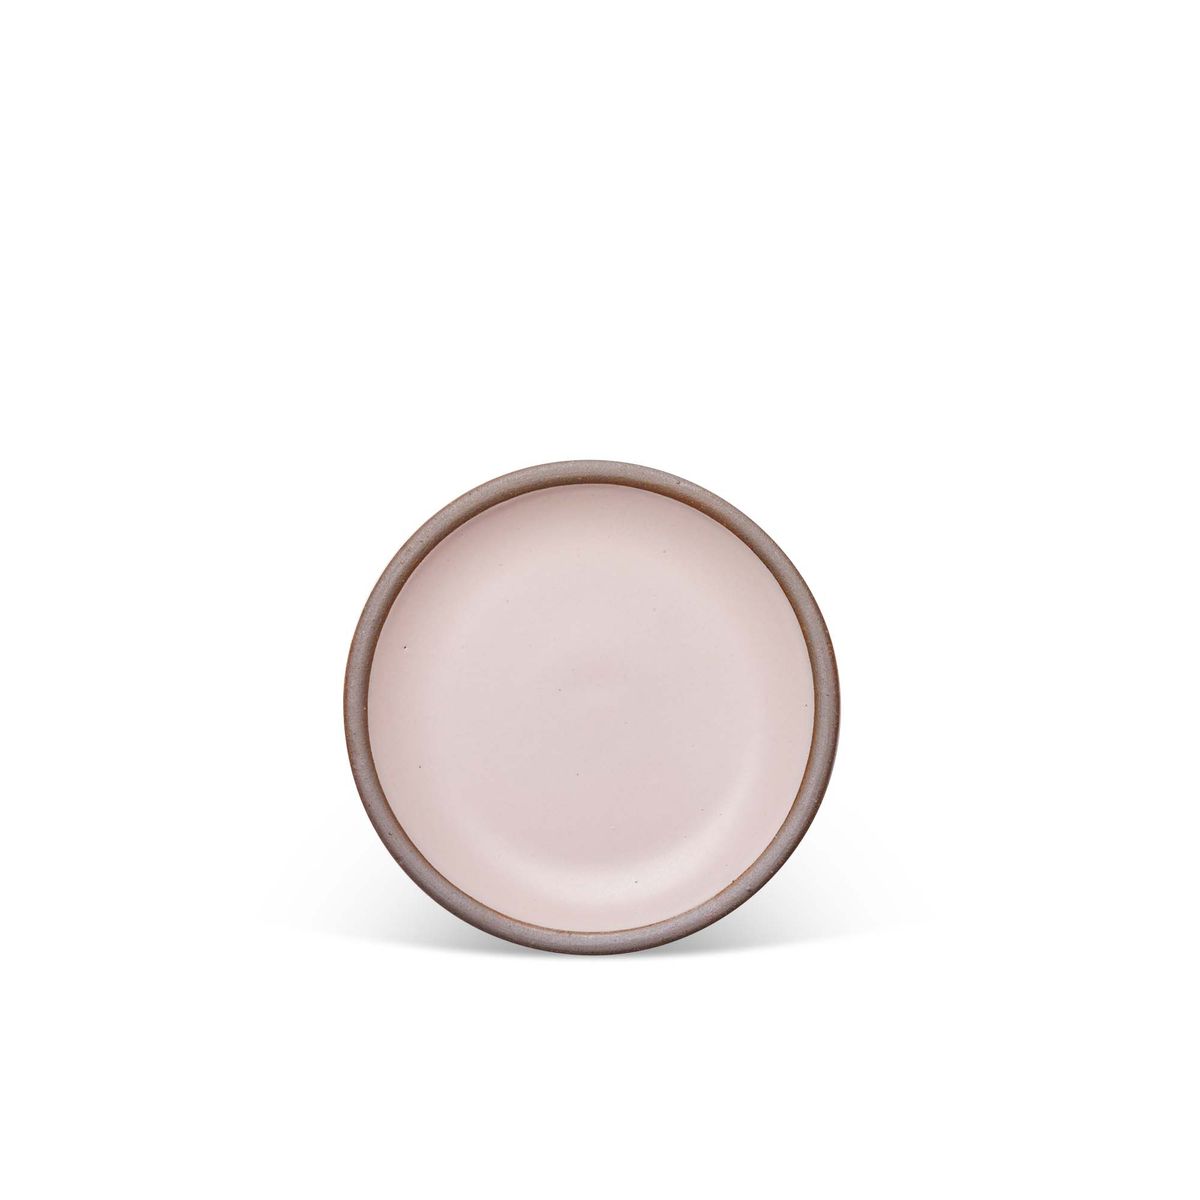 A dessert sized ceramic plate in a soft light pink color featuring iron speckles and an unglazed rim